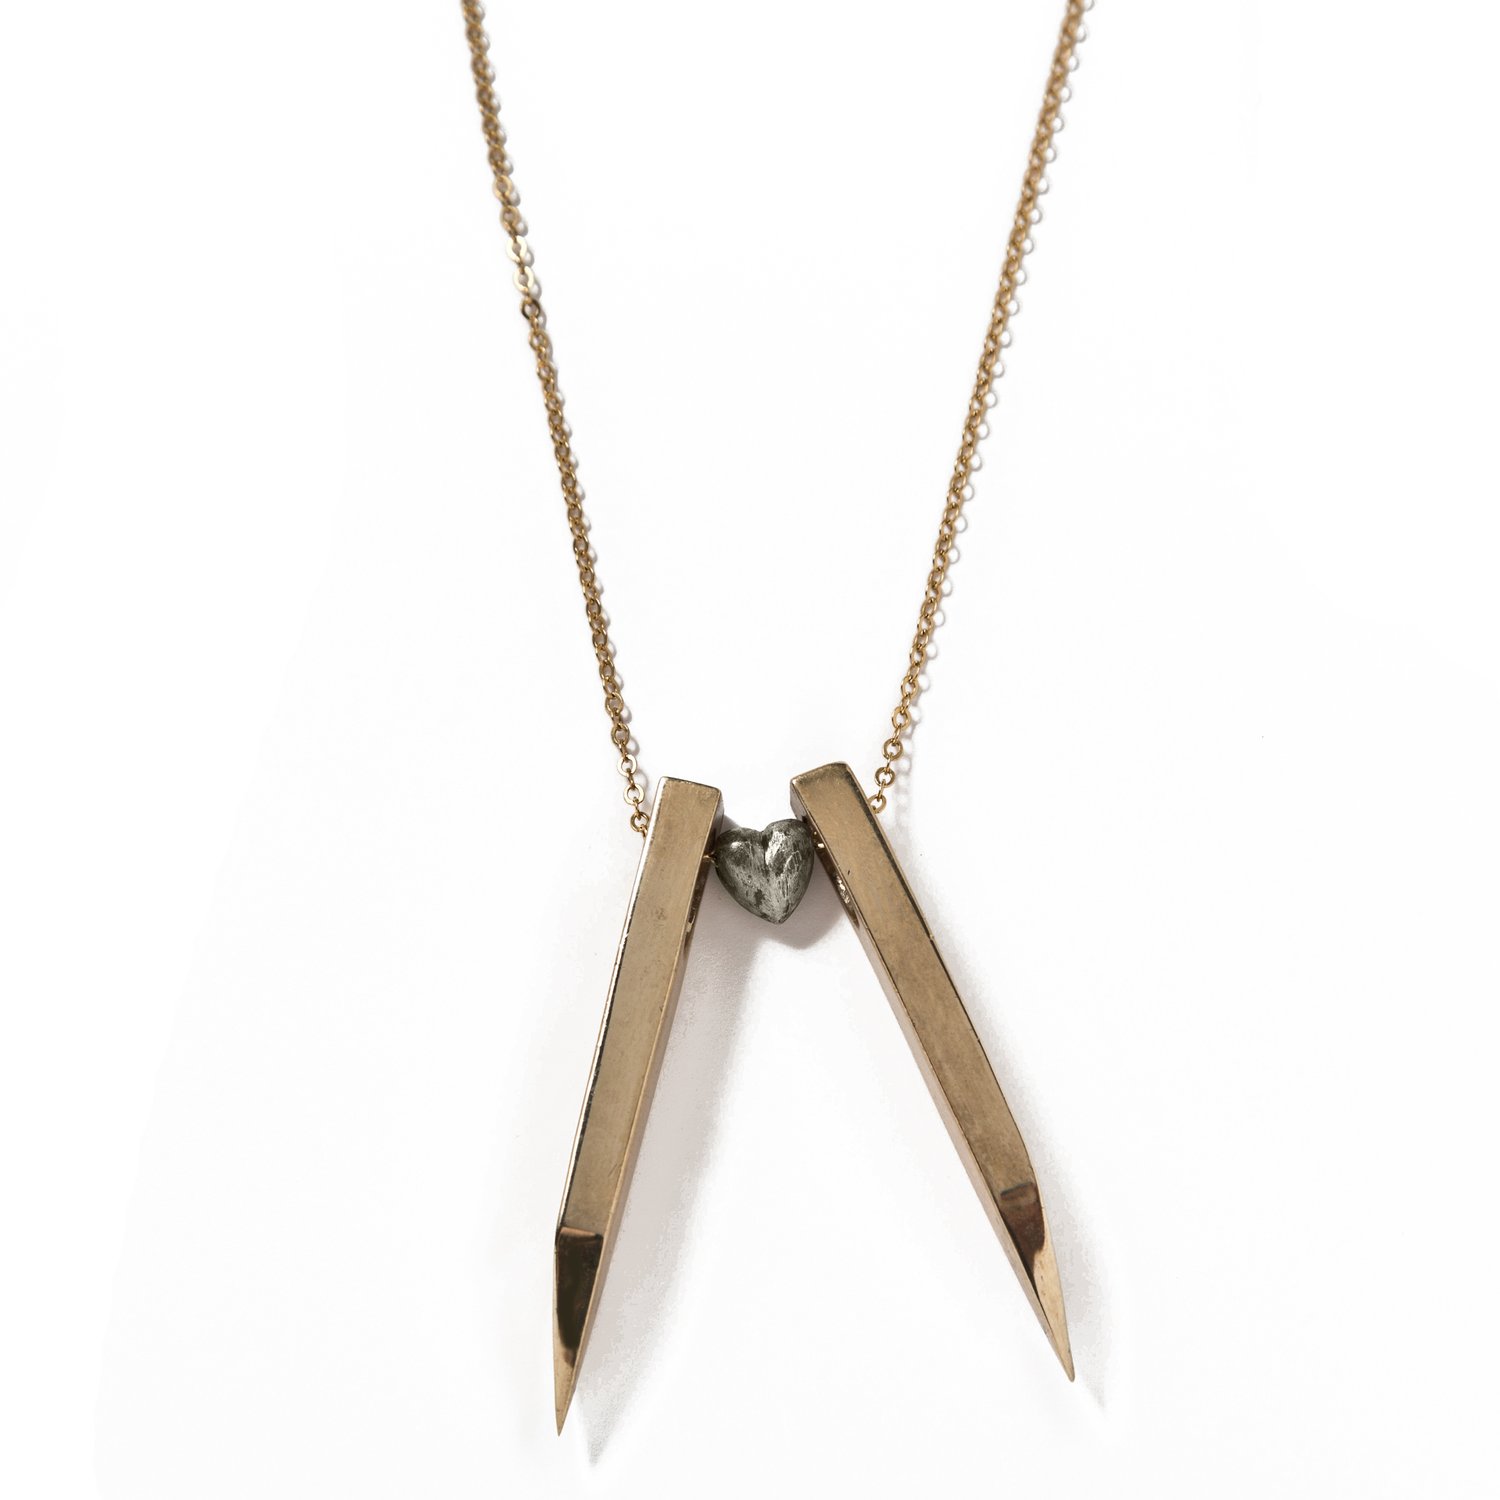 Stones & Bones NYC - Handcrafted Jewelry and Accessories Inspired